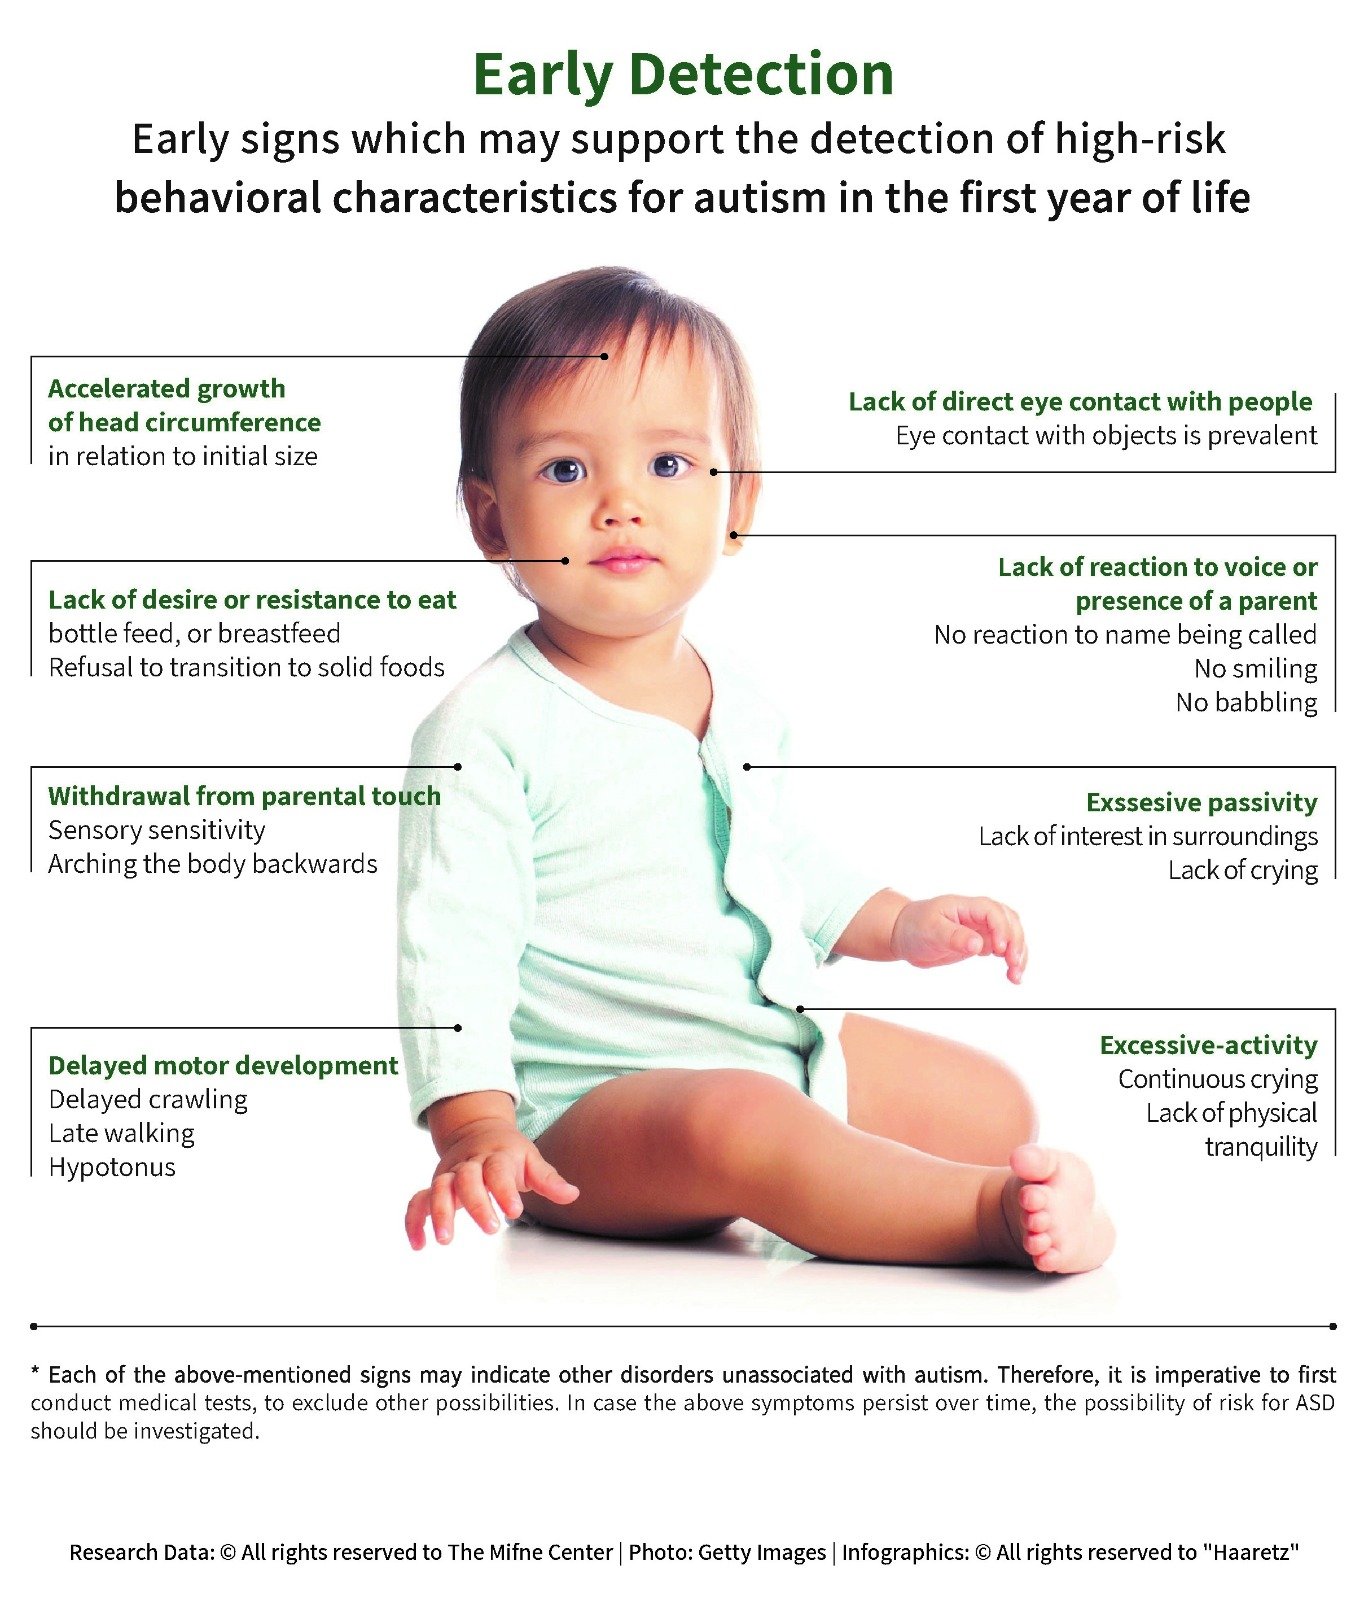 8 Signs of Autism in Infants